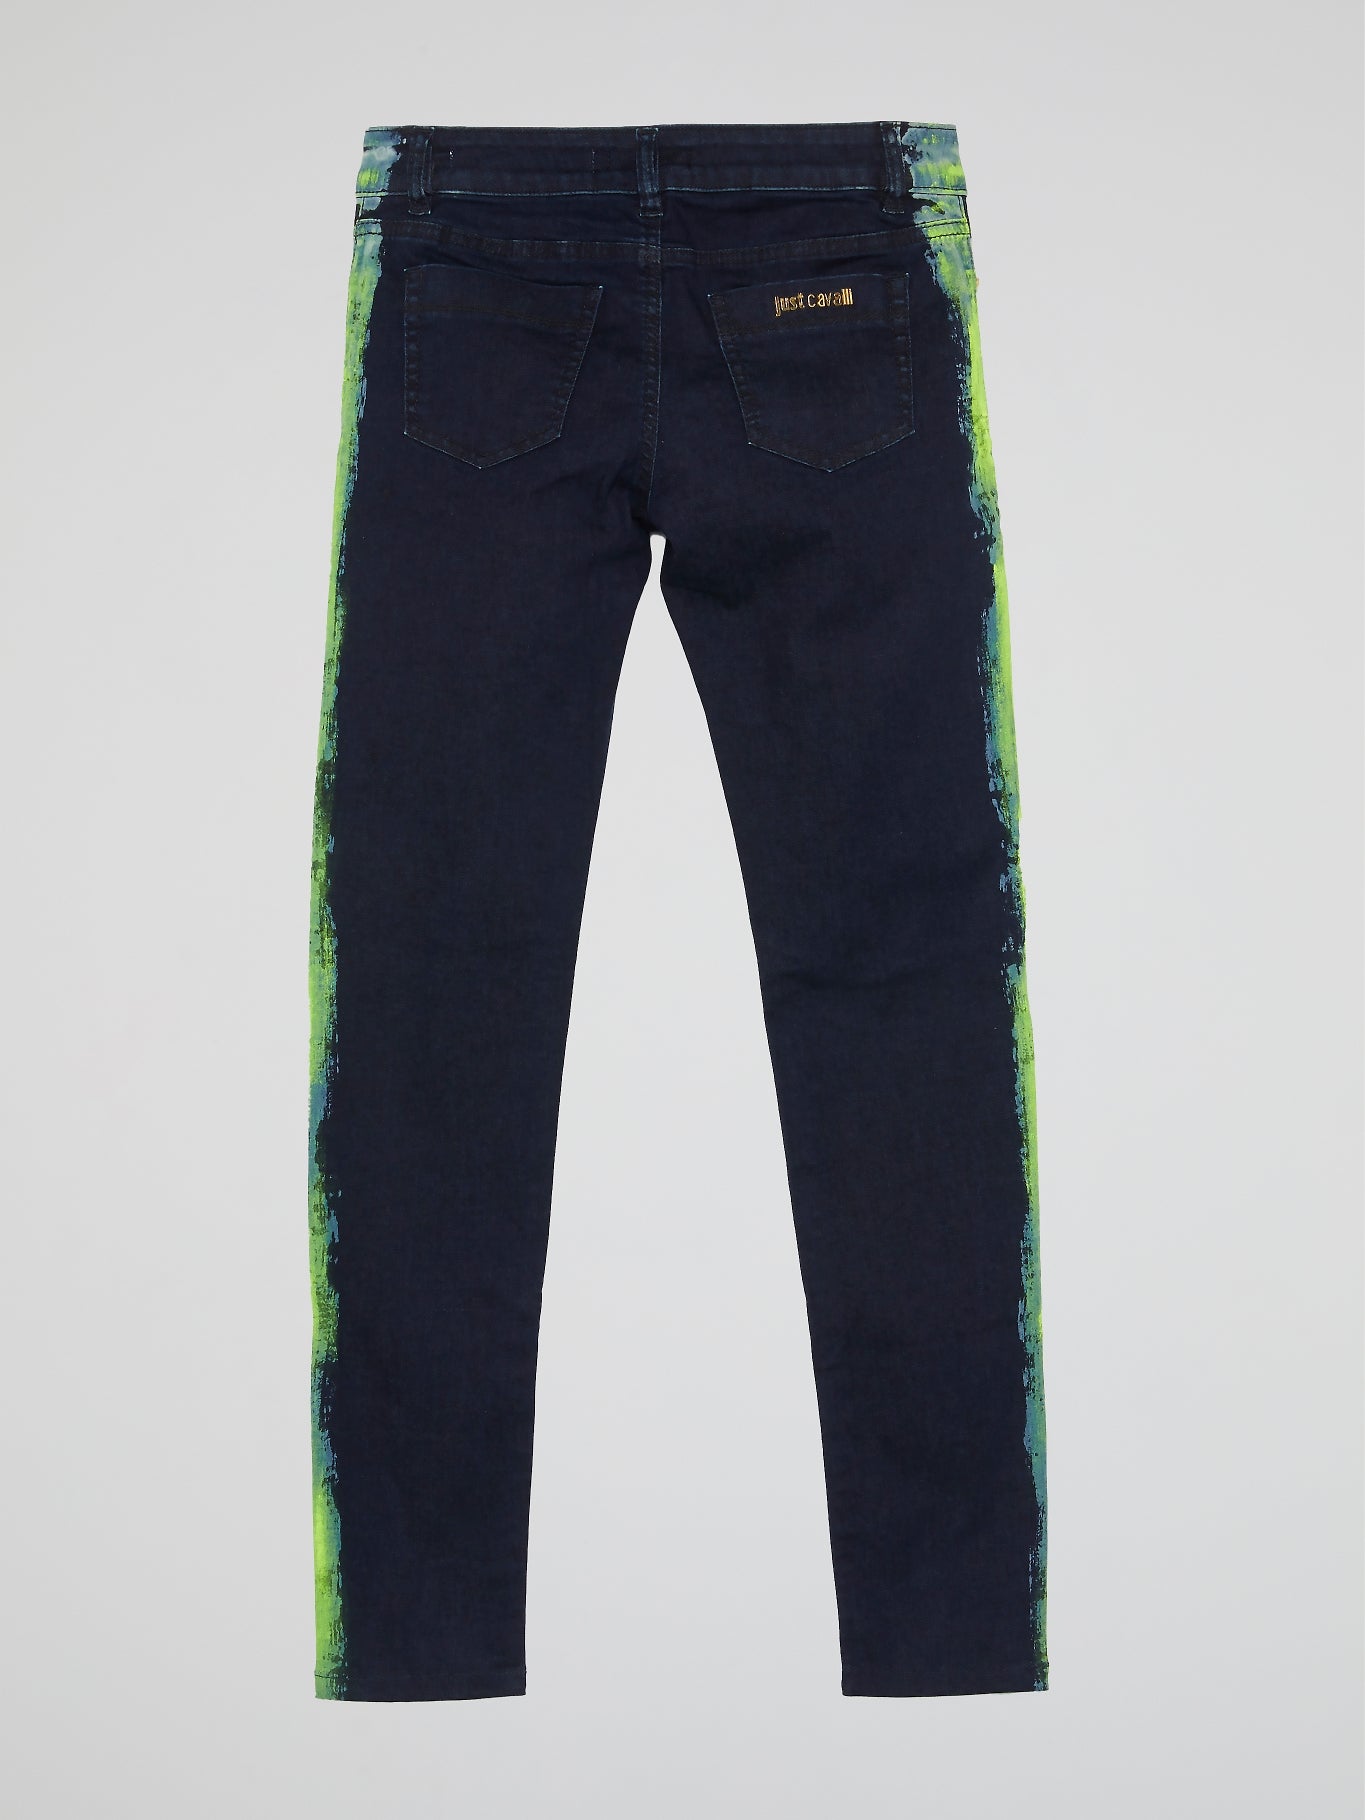 Navy Contrast Side Print Jeans